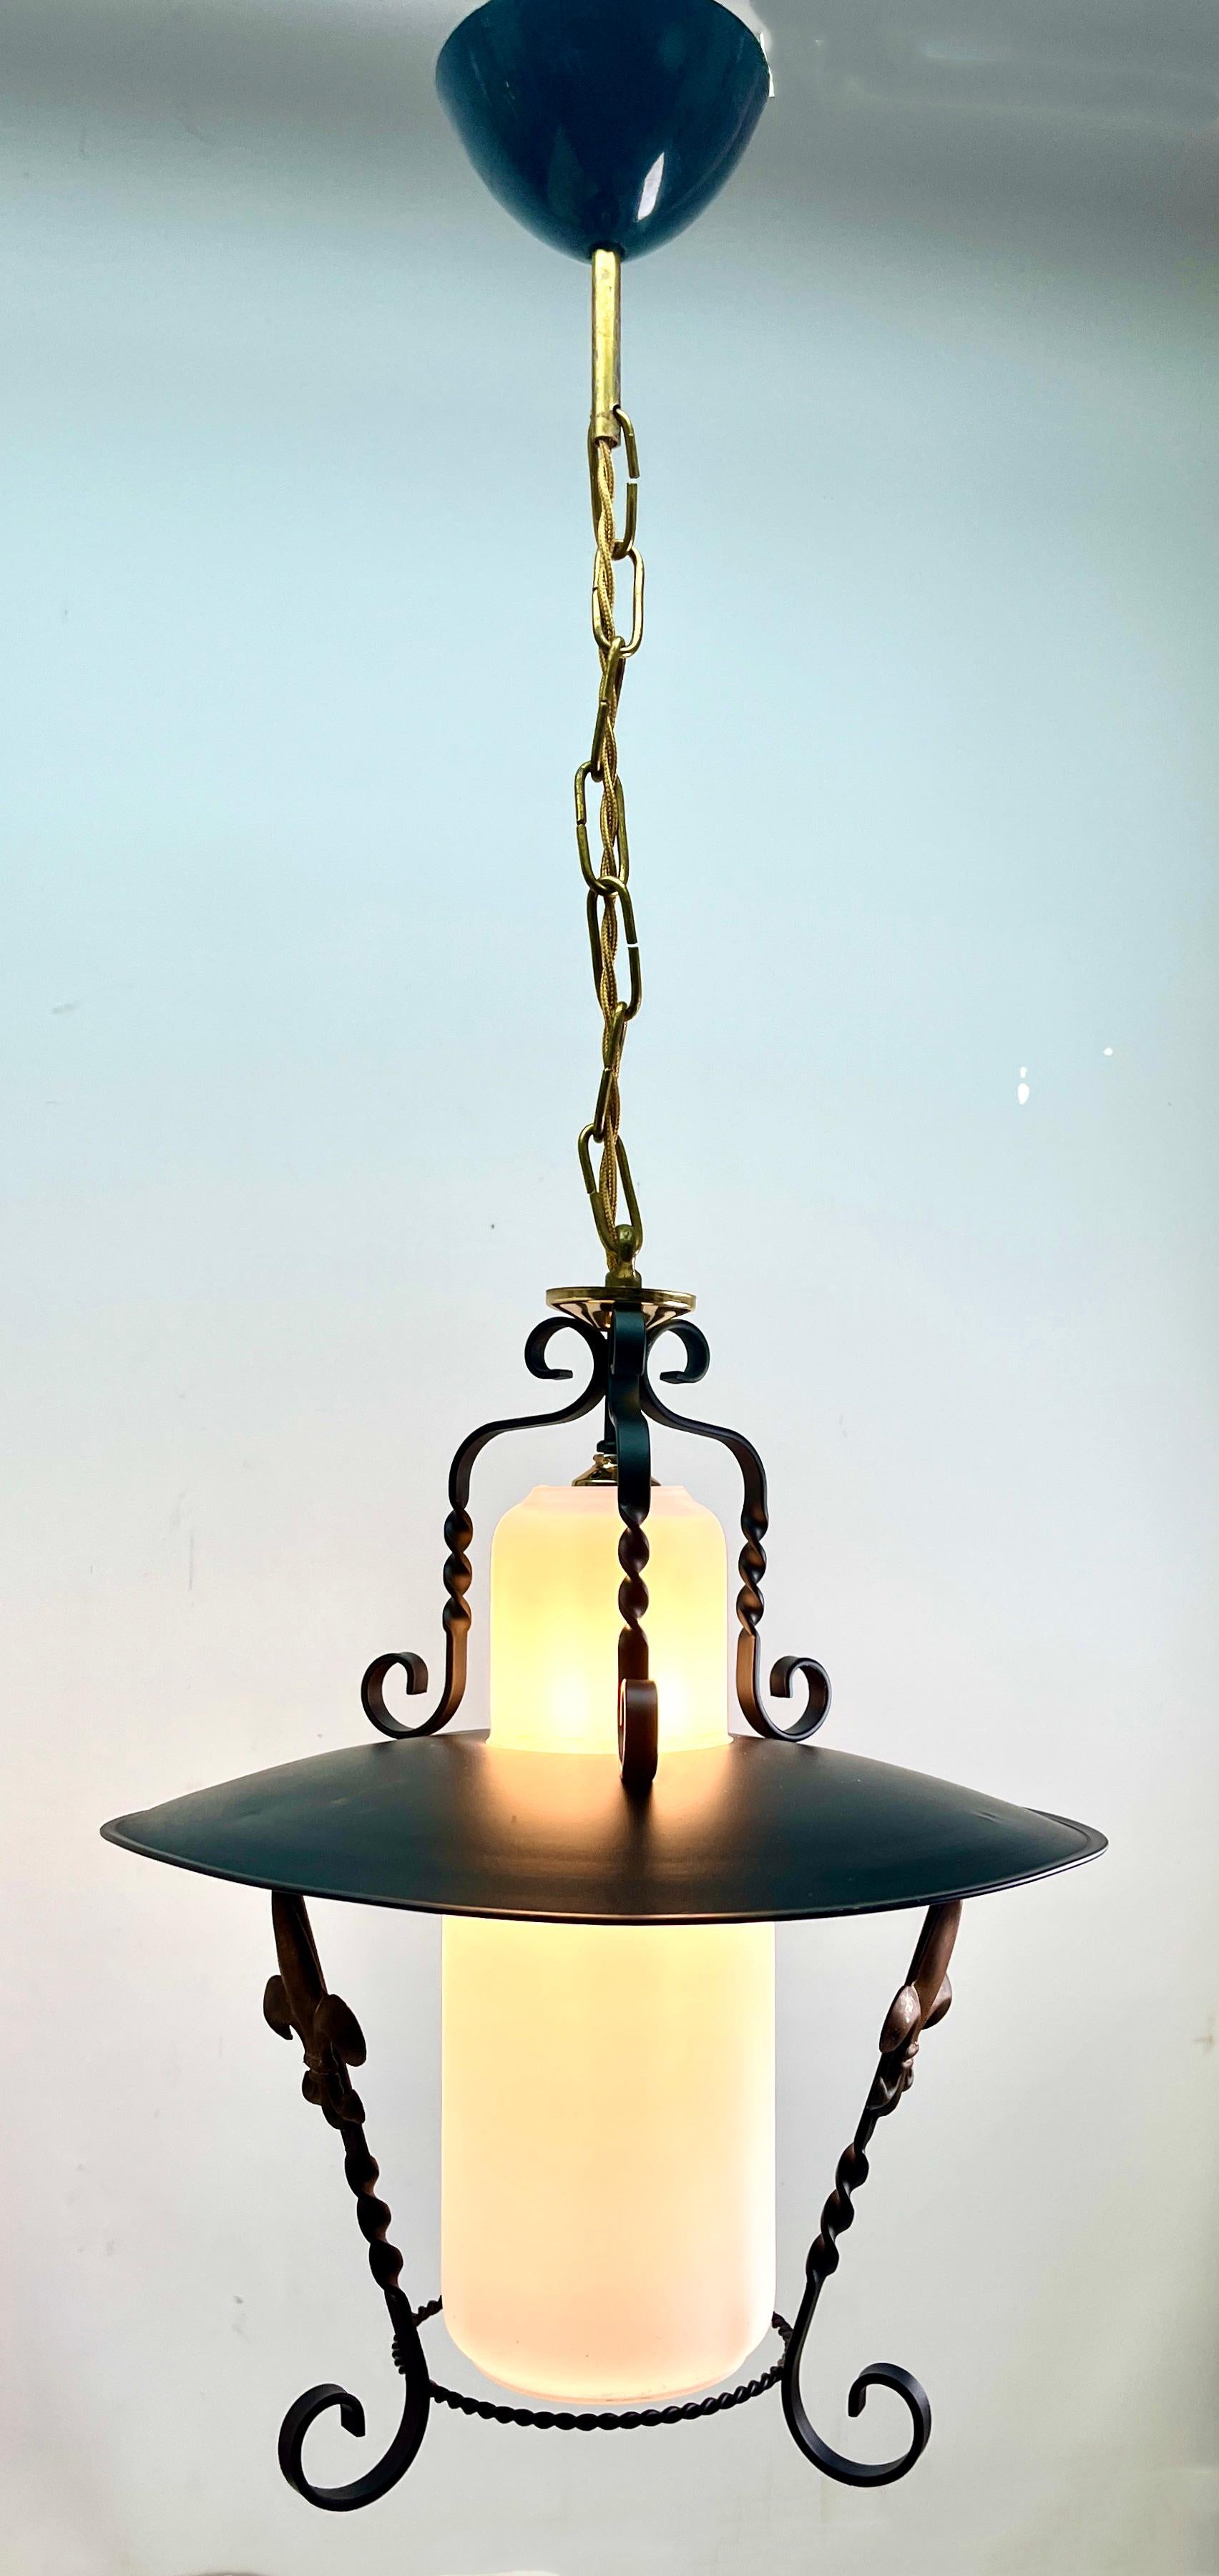 Forget and ribbed glass pendant lamp.
Materials:  Ribbed glass globe lampshade. Black painted curved iron slats pleated as a cage. Brass ornamental nuts, screws and parts. Brass chain and canopy. New E27 socket.

Complete restoration
Been